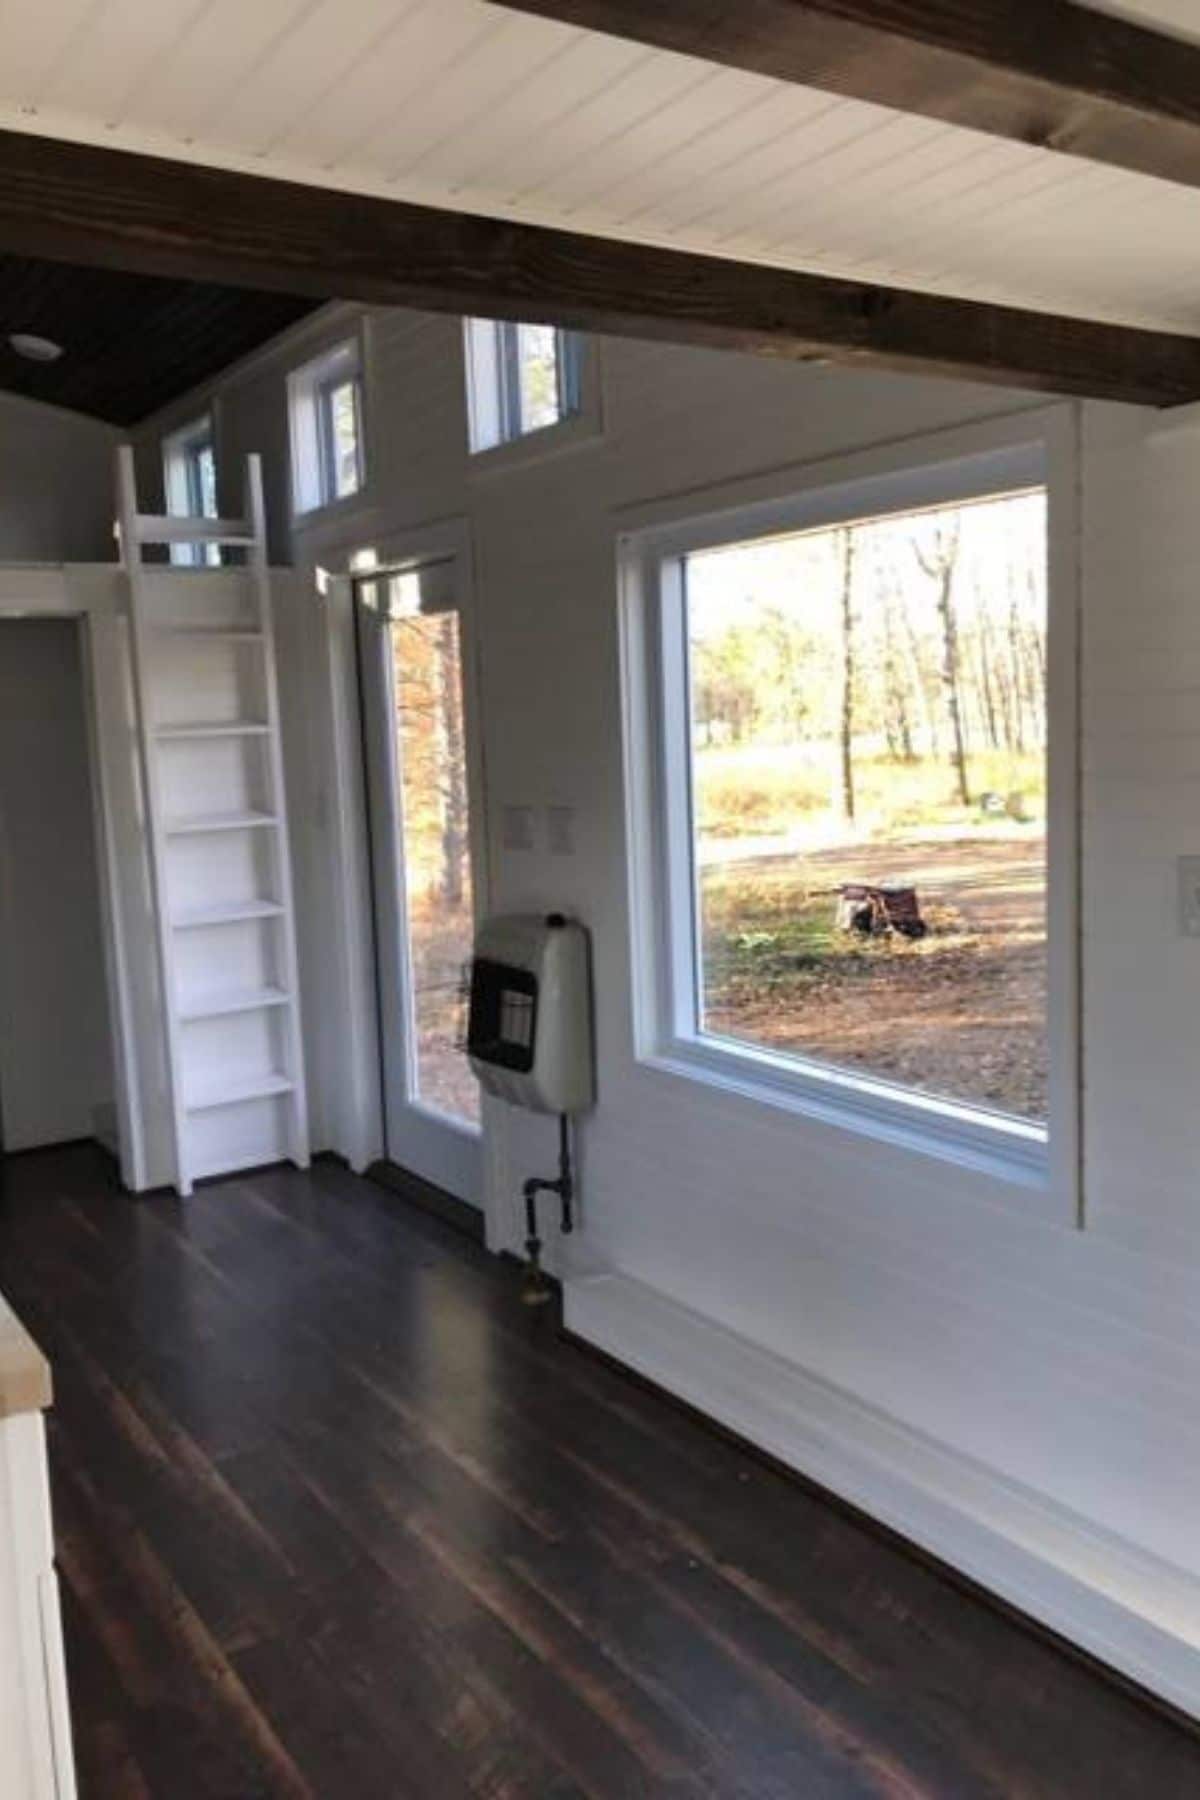 front door and large window to right of image inside tinyhome